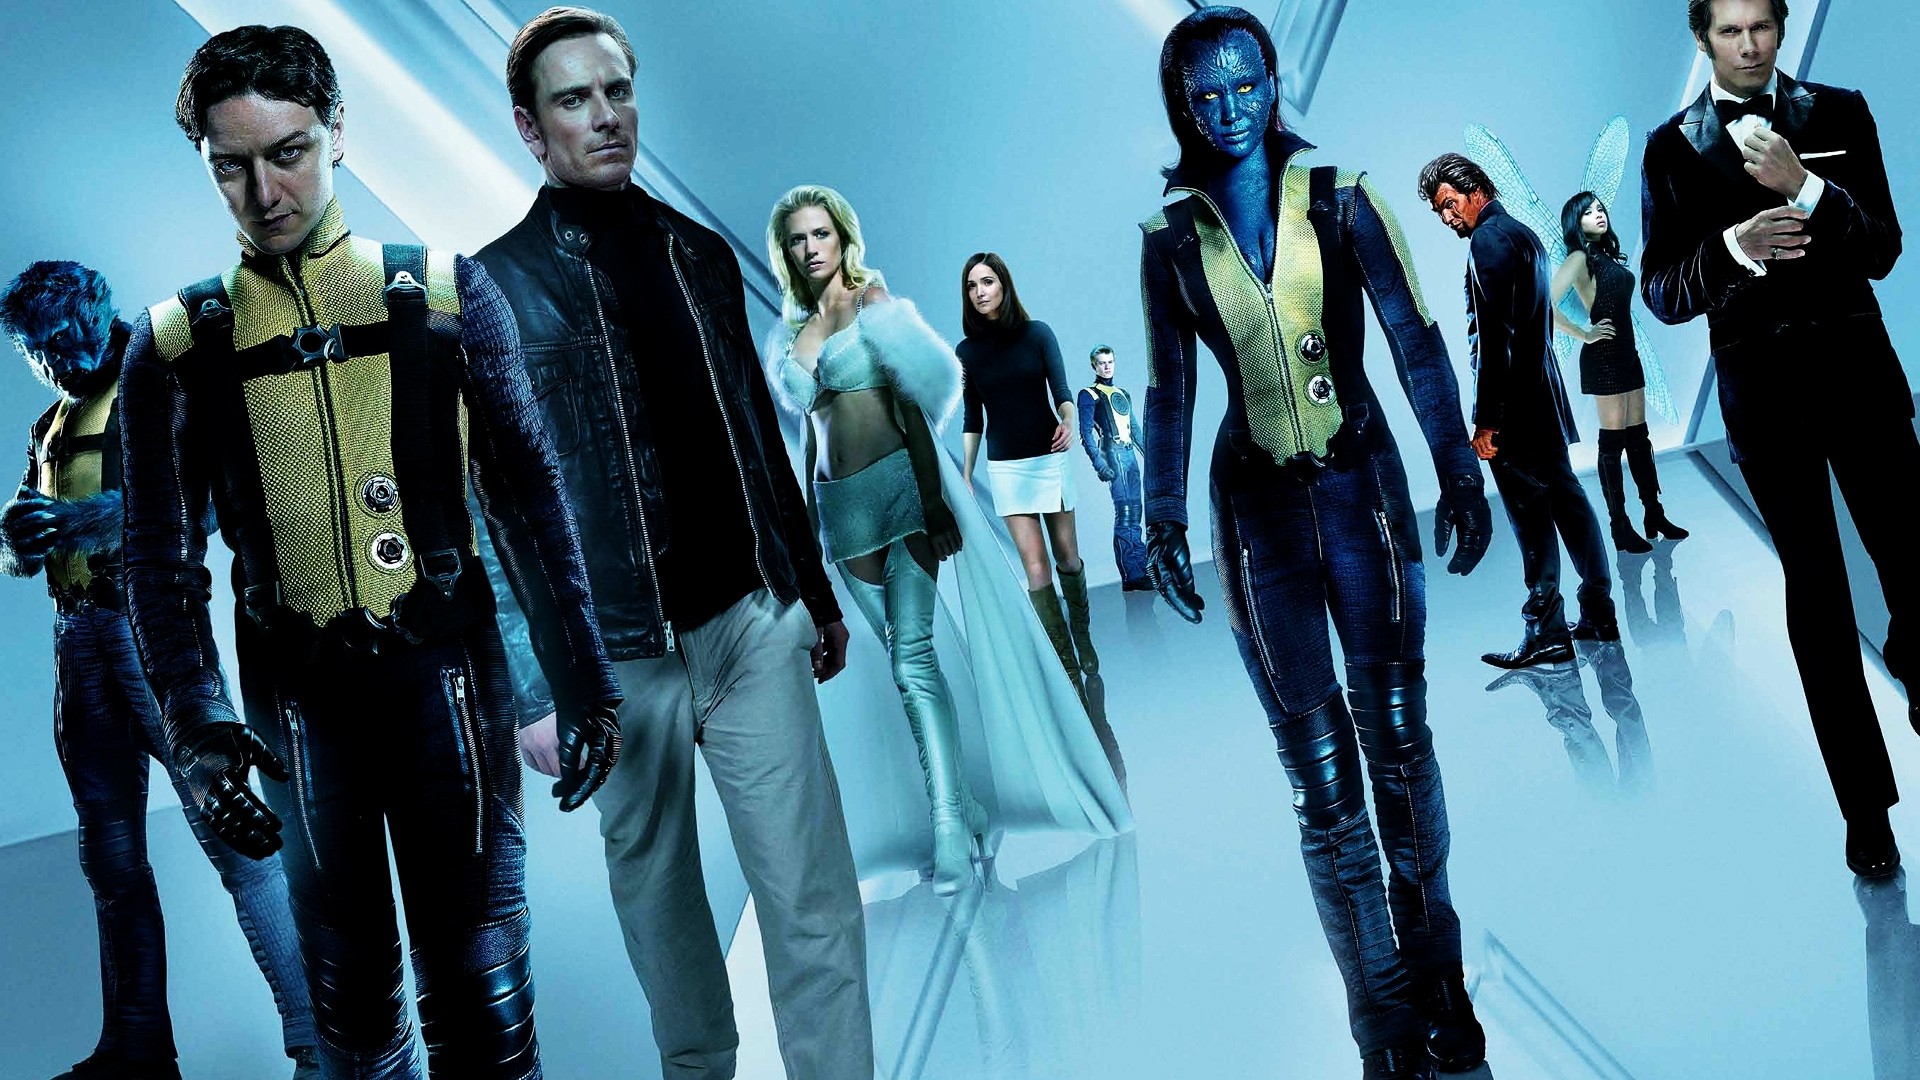 People 1920x1080 movies X-Men: First Class Magneto Charles Xavier Mystique James McAvoy Michael Fassbender Beast (character) Jennifer Lawrence Emma Frost X-Men Nicholas Hoult